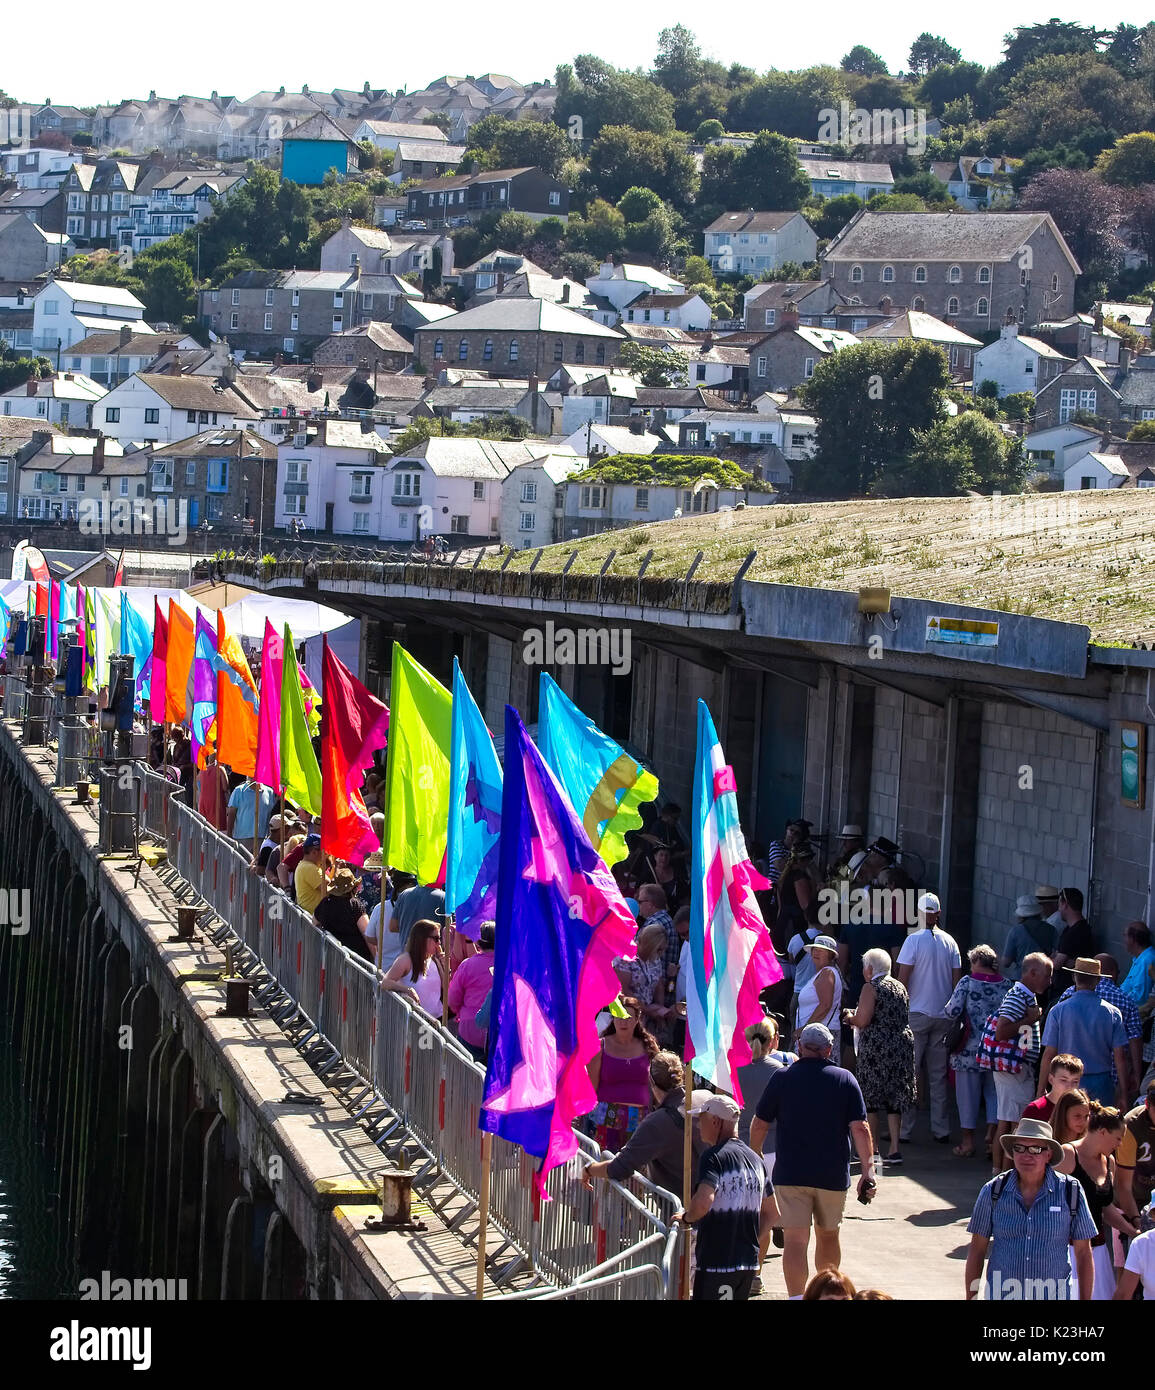 Newlyn, Cornwall, UK. 28th Aug, 2017. Flags and crowds at the Newlyn Fish Festival, Newlyn, Cornwall, England, UK. Credit: tony mills/Alamy Live News Stock Photo